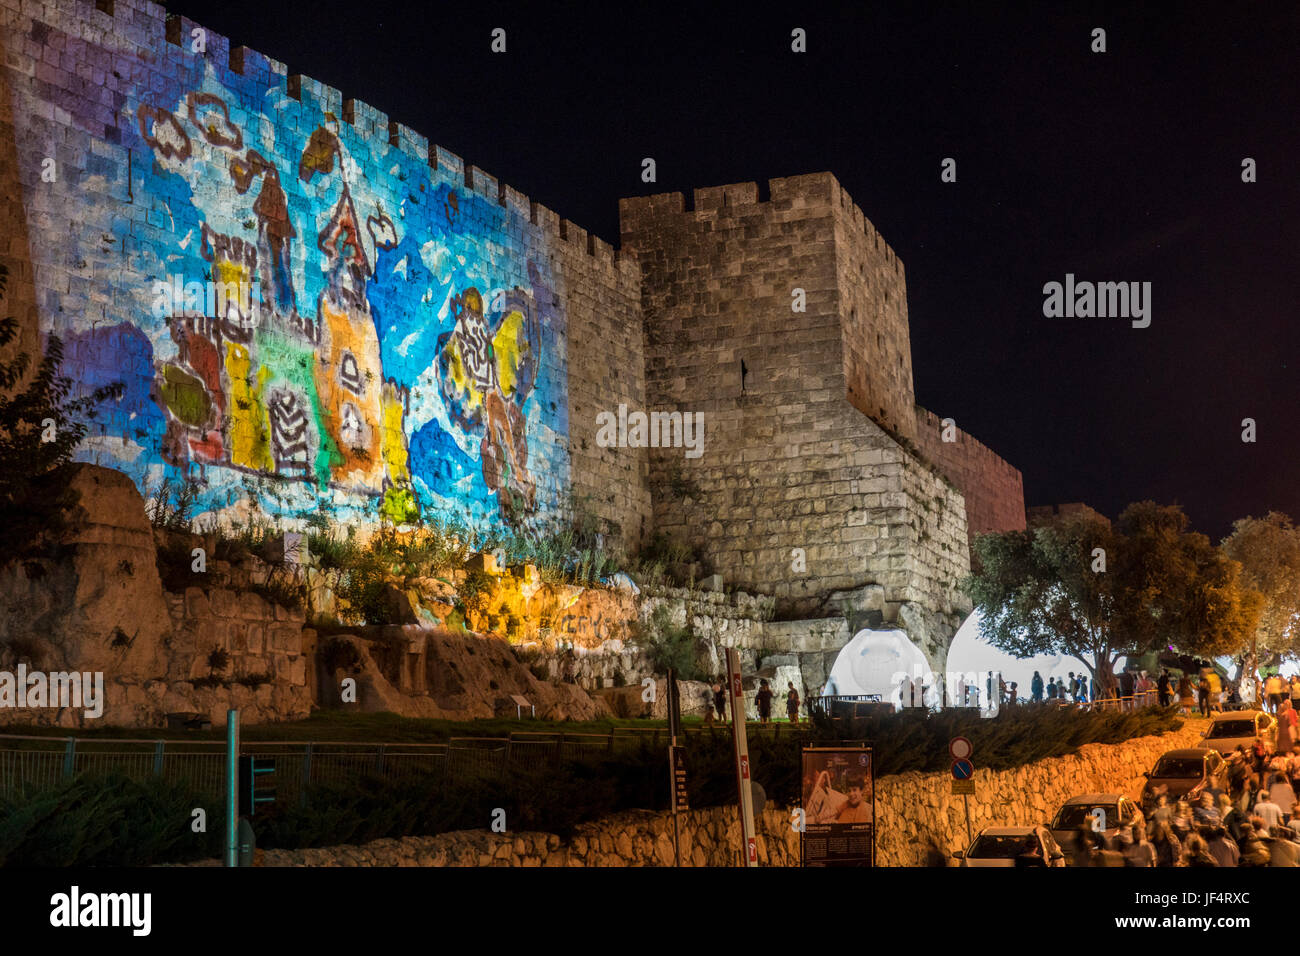 Jerusalem, Israel. 28th June, 2017. jerusalem, Israel. art shows and illuminations between the Jaffa gate, the Tower of David and the Zion gate, during the annual 'Light in Jerusalem' festival in the old city. Credit: Yagil Henkin/Alamy Live News Stock Photo